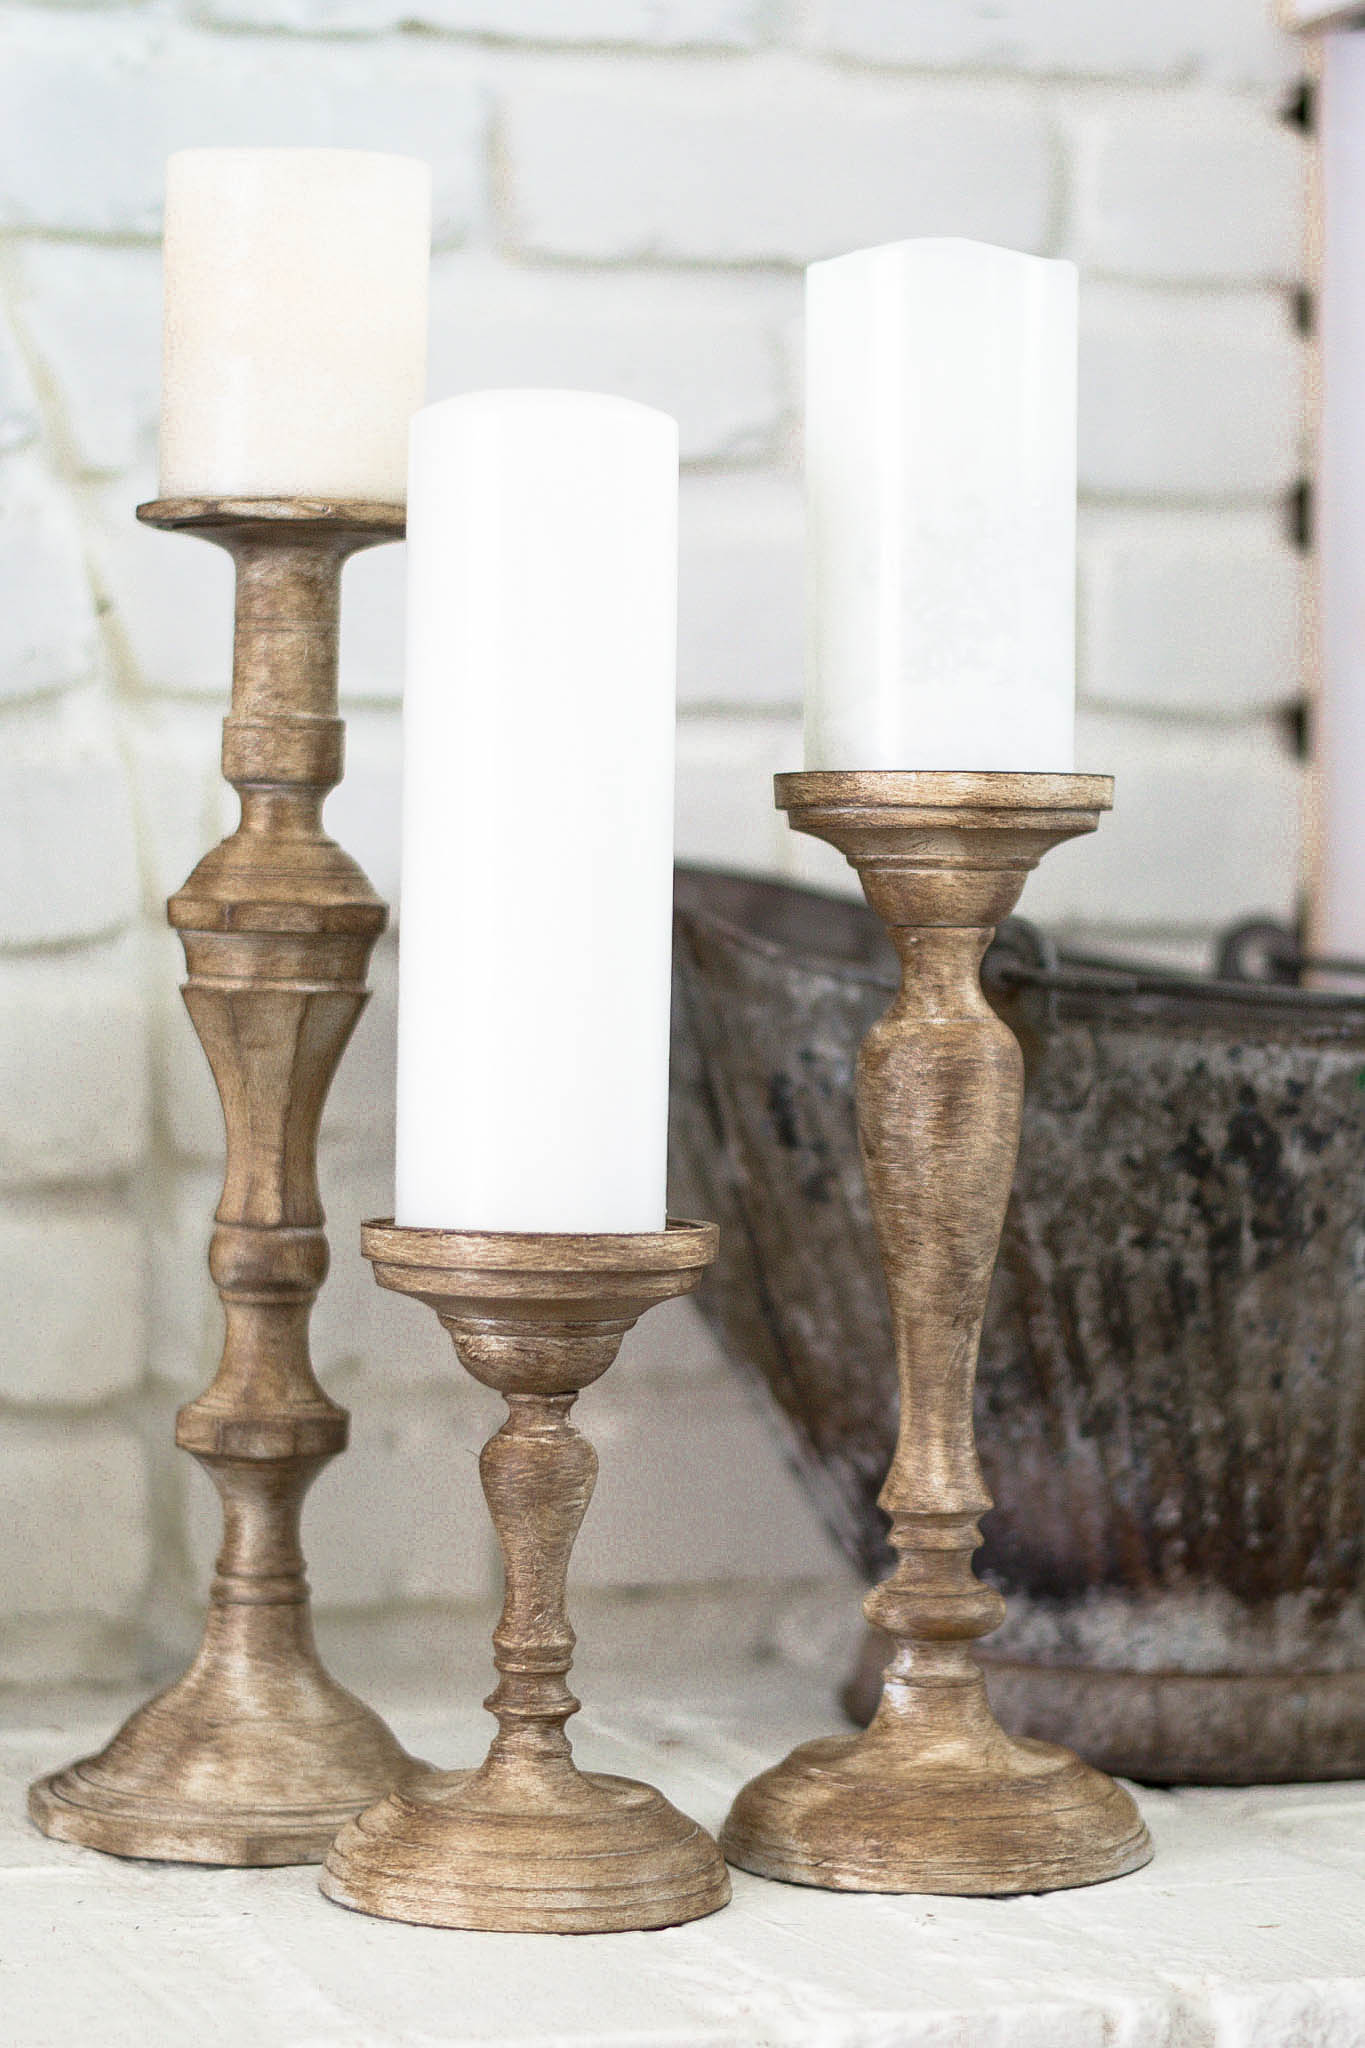 Easy DIY Candle Holders tutorial! Take old candlesticks and turn them into gorgeous Fixer Upper style wood farmhouse candlesticks!